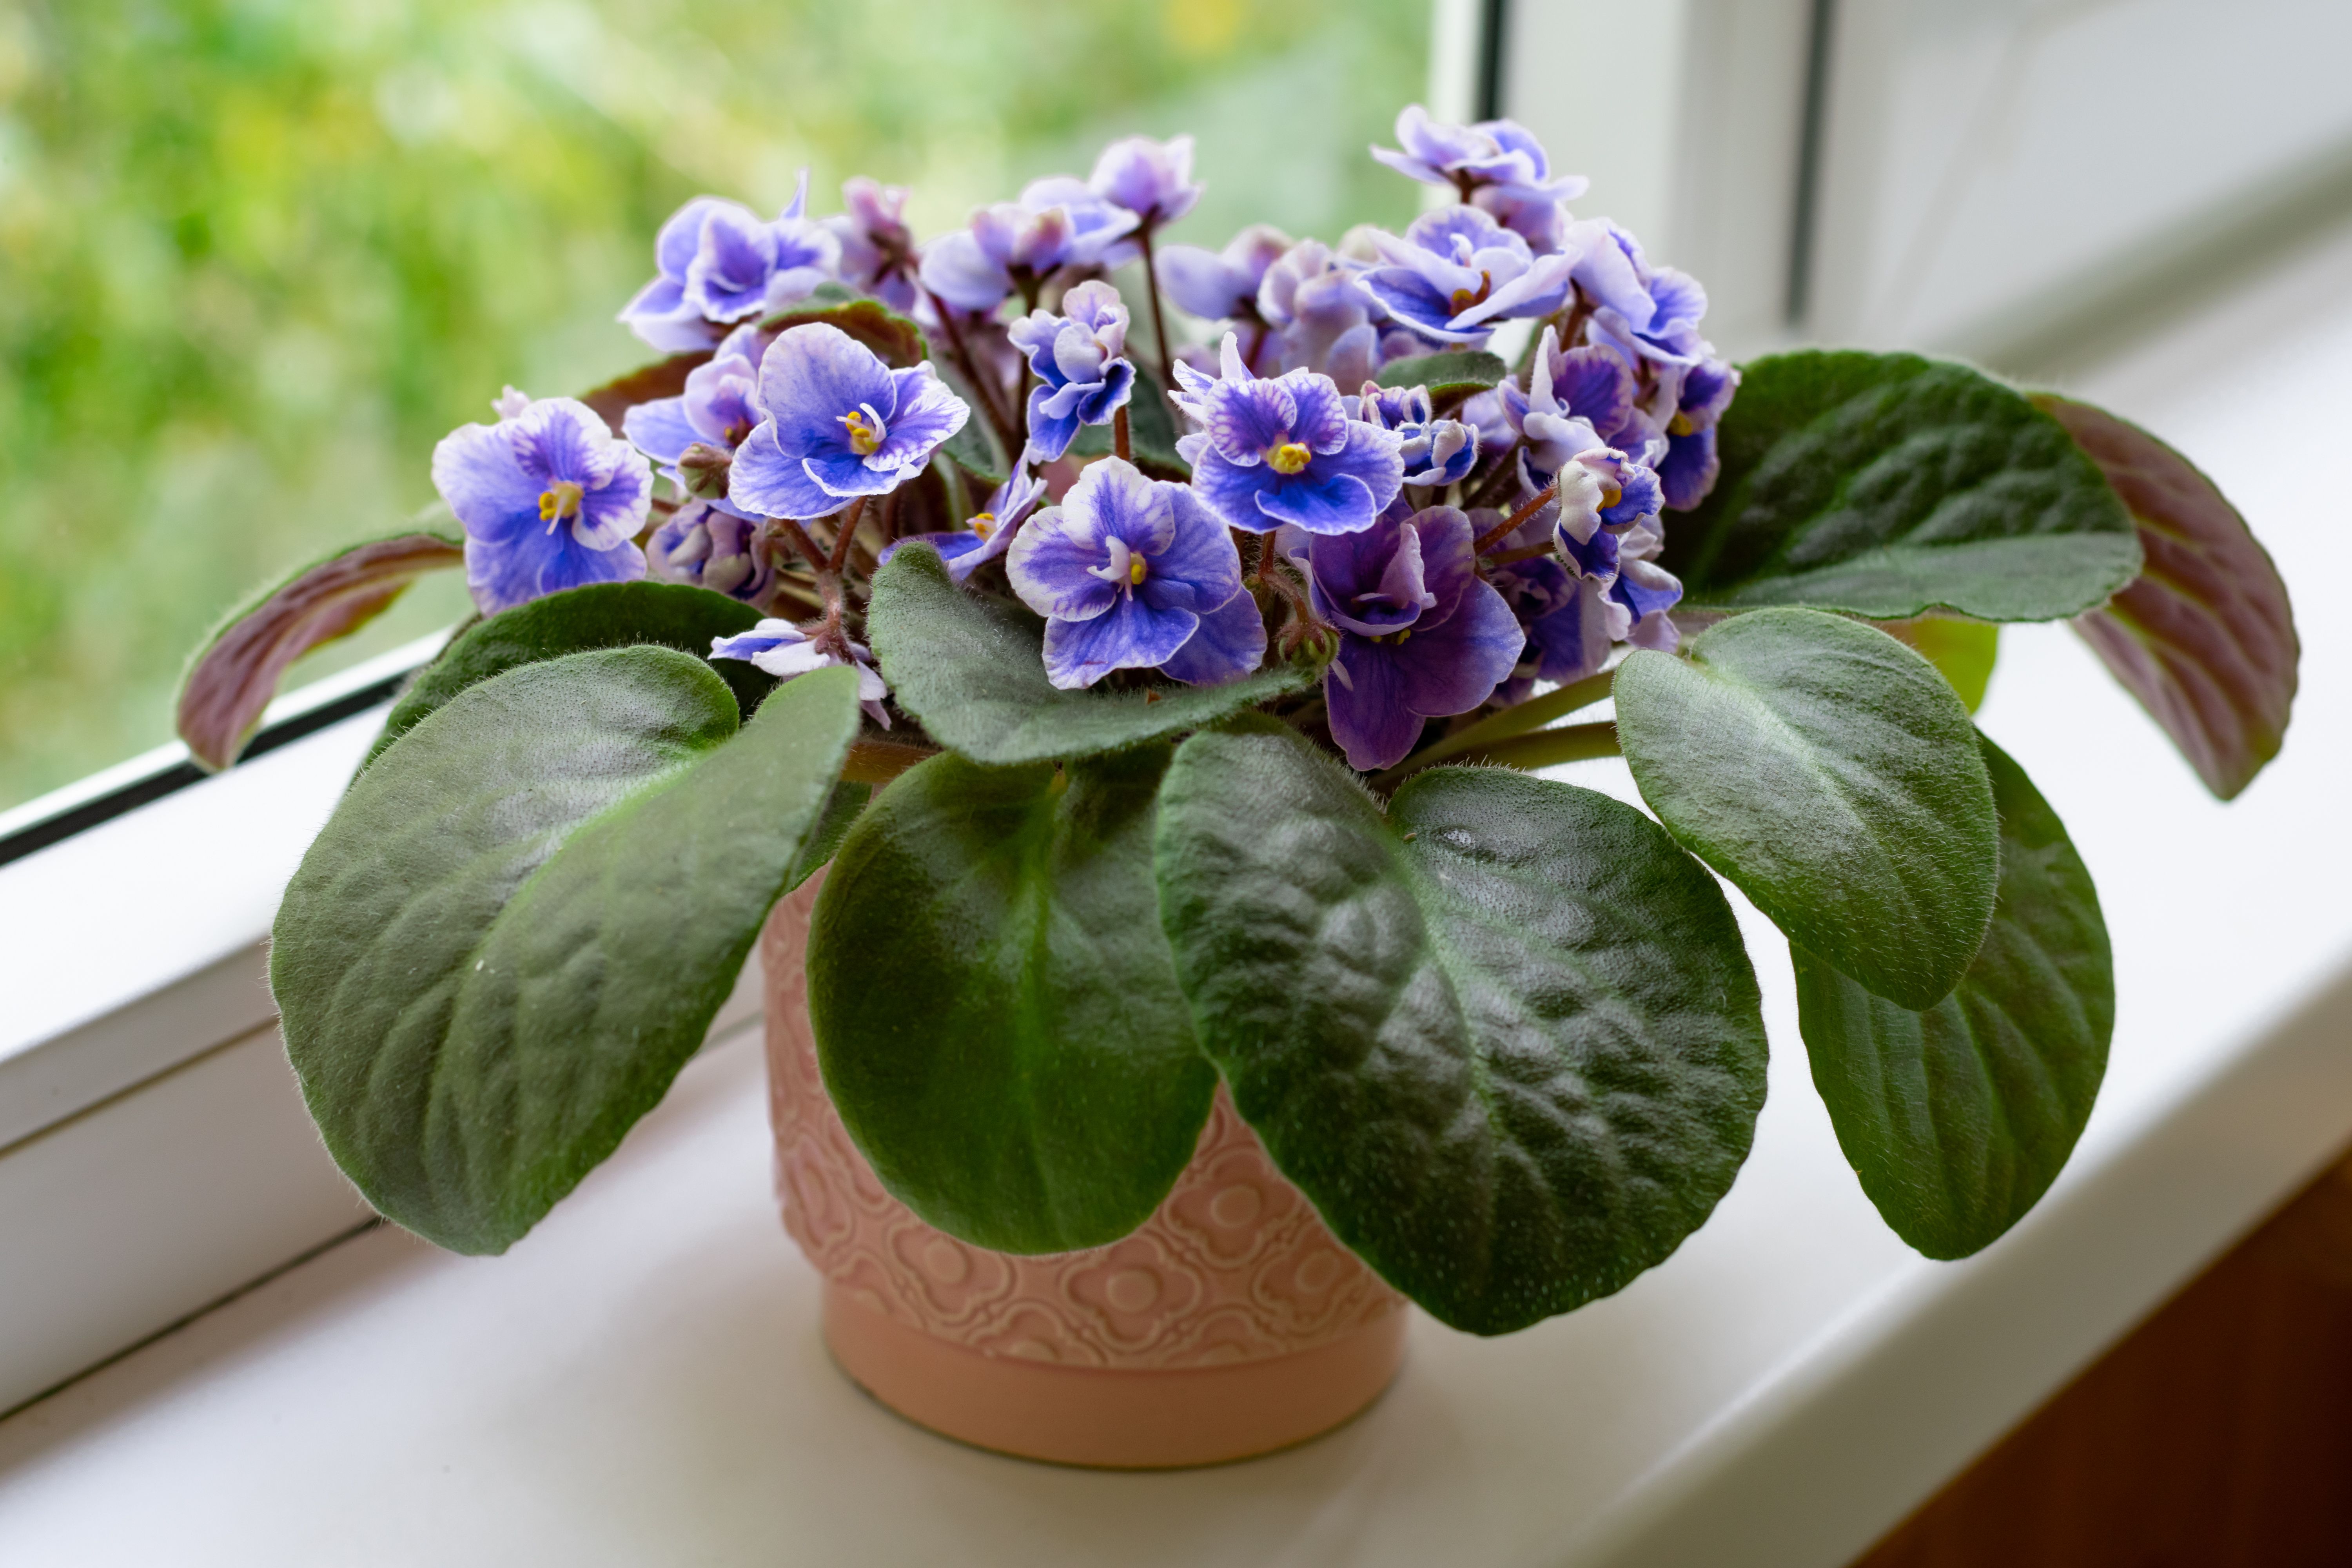 Flowering African violet plant on a window sill